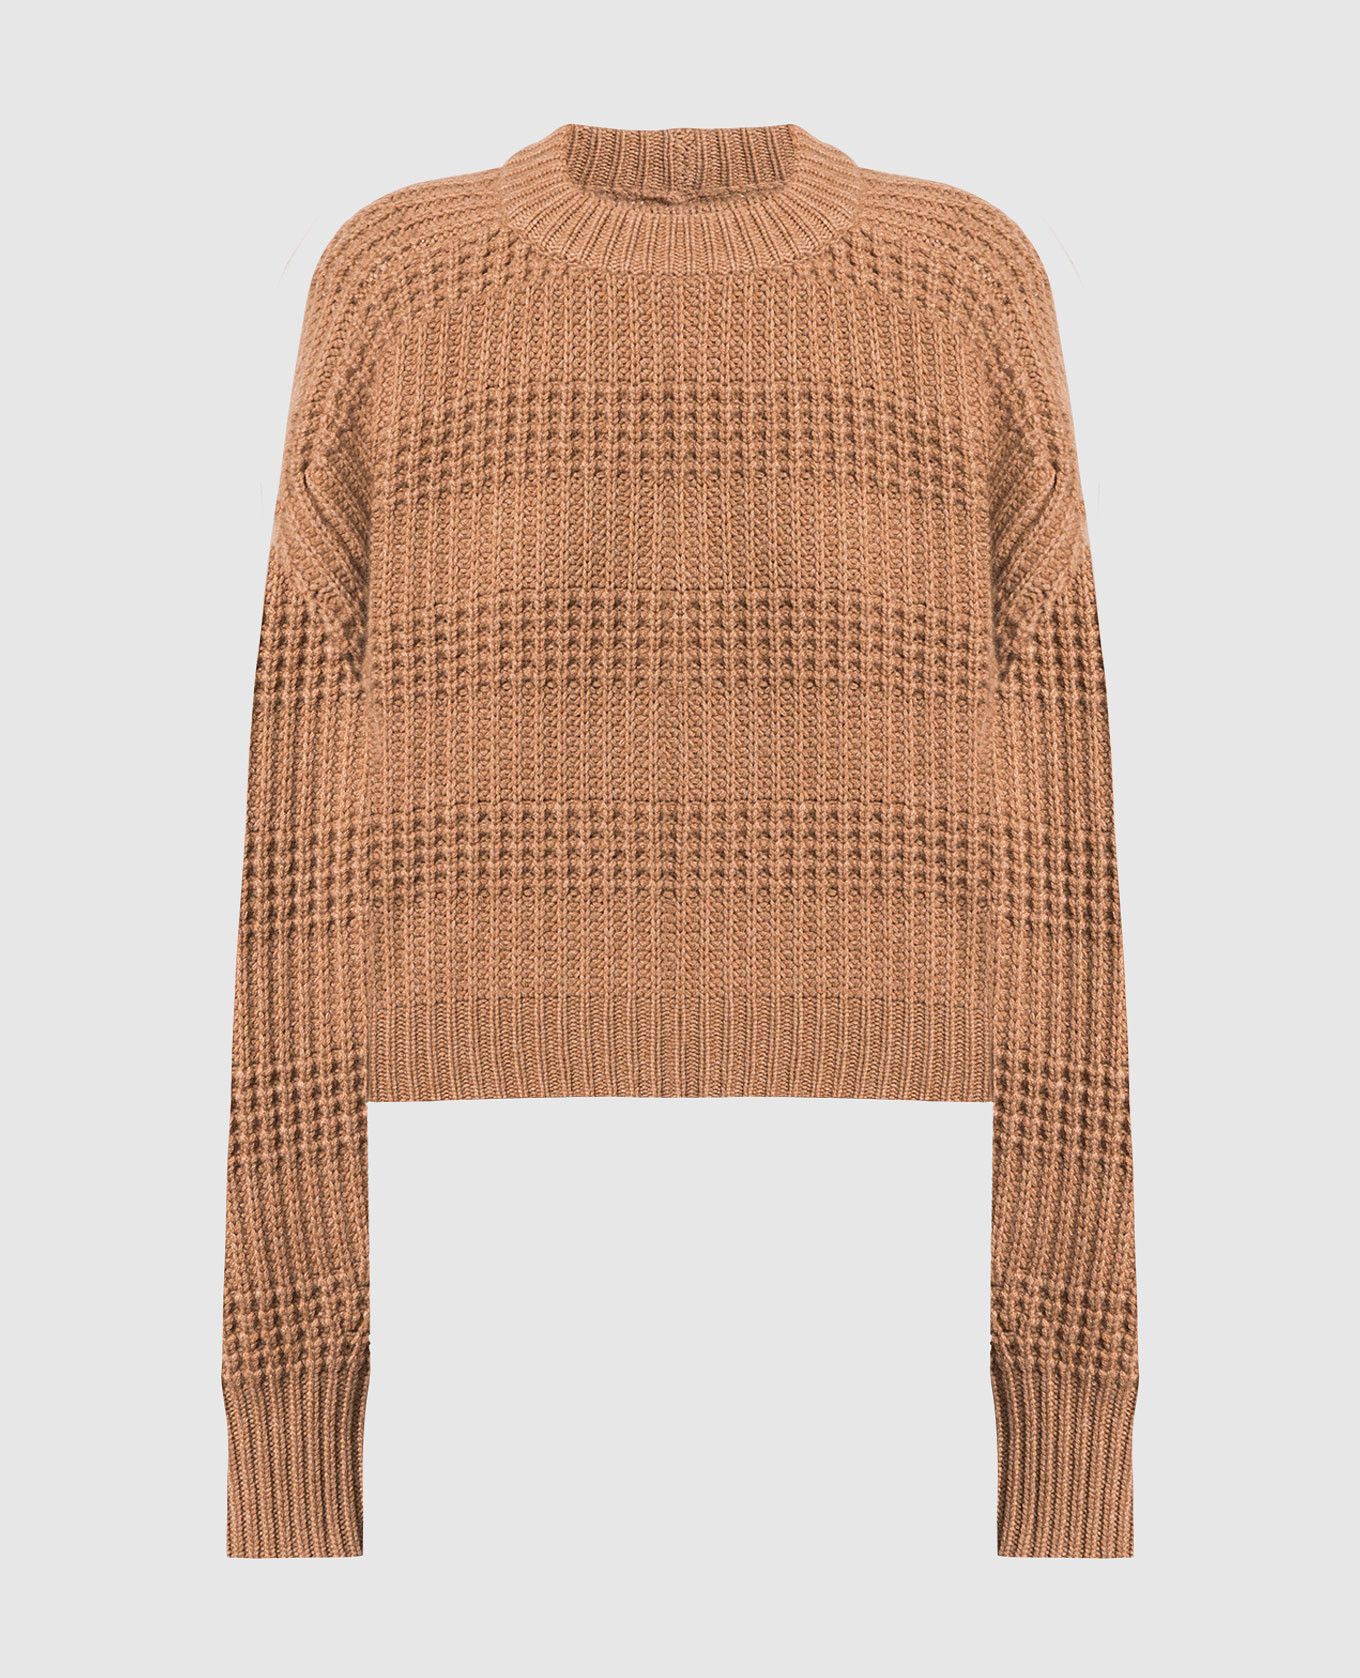 Brown sweater made of cashmere in a textured pattern